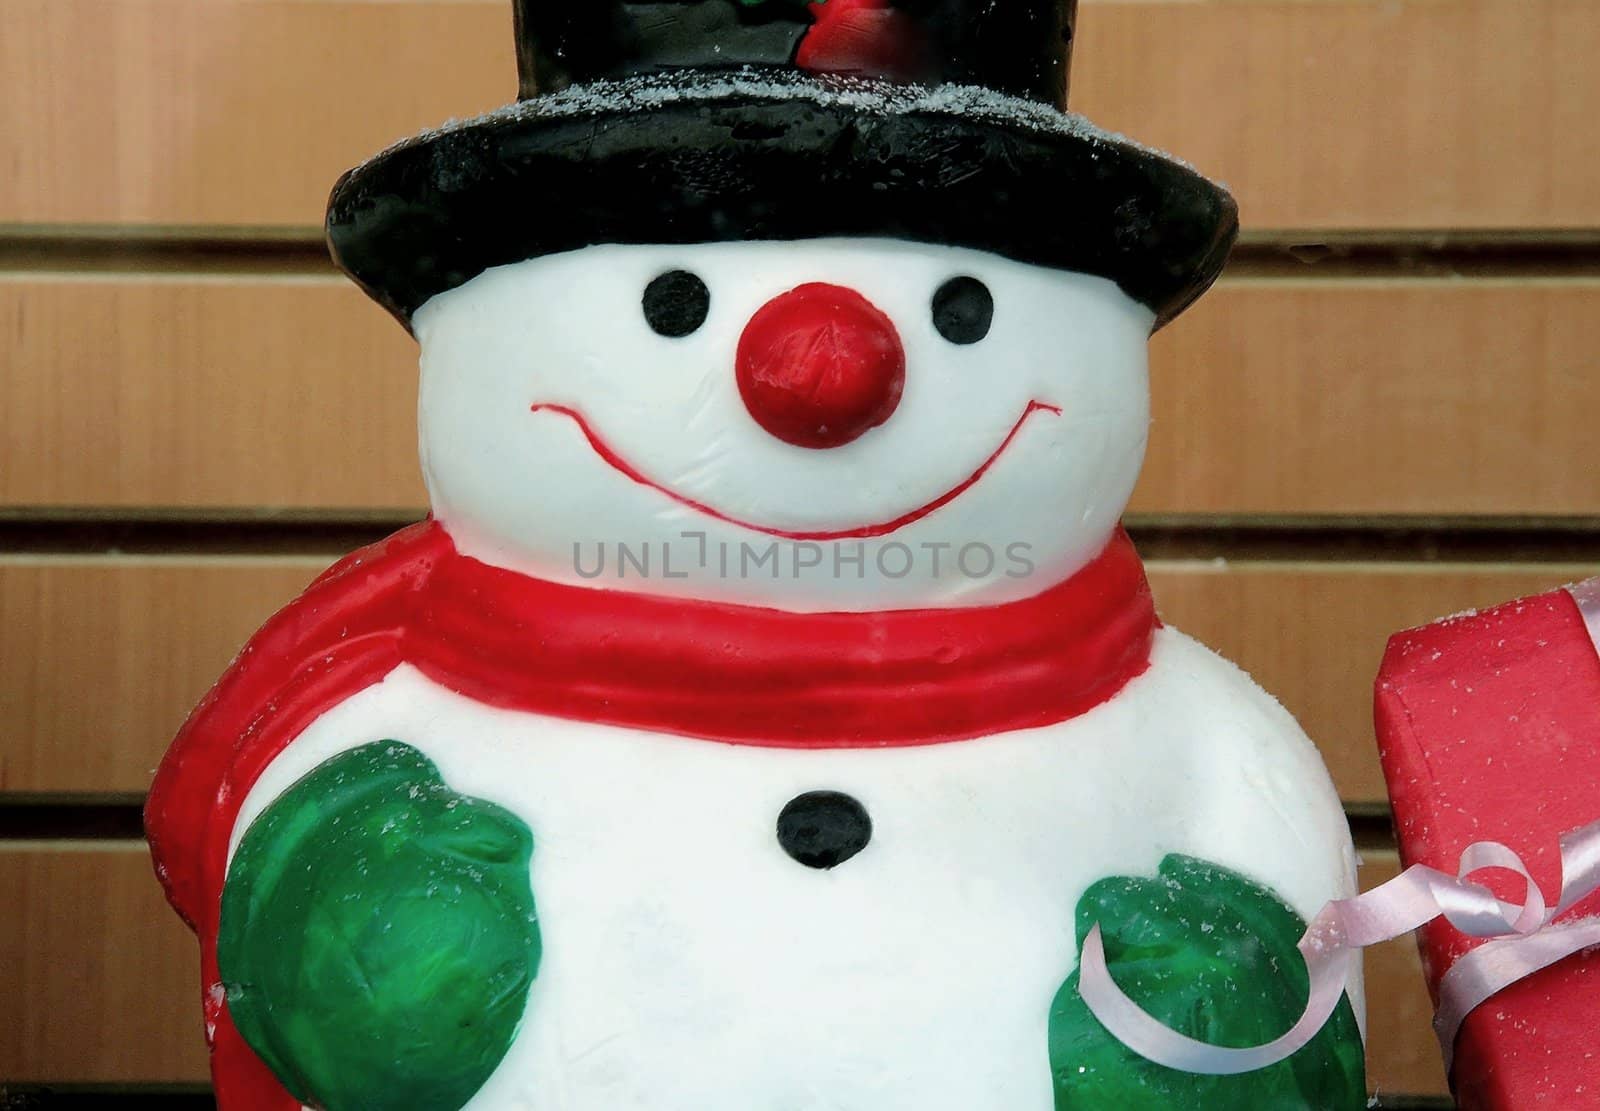 Snowman with his package present, waiting for christmas. Representation of the enjoyment and the happiness